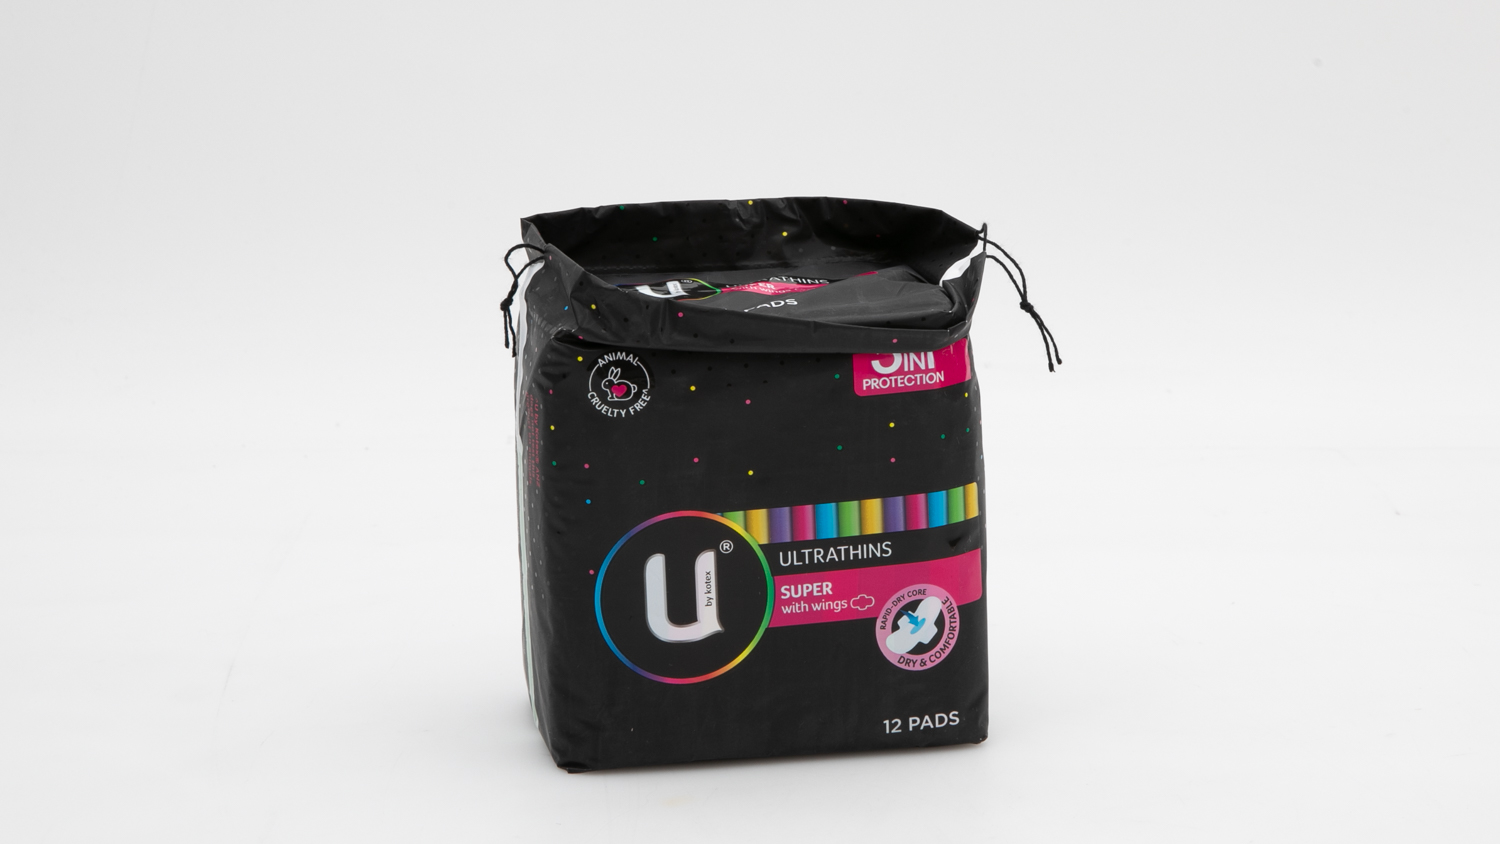 U by Kotex Ultrathins Super with wings carousel image